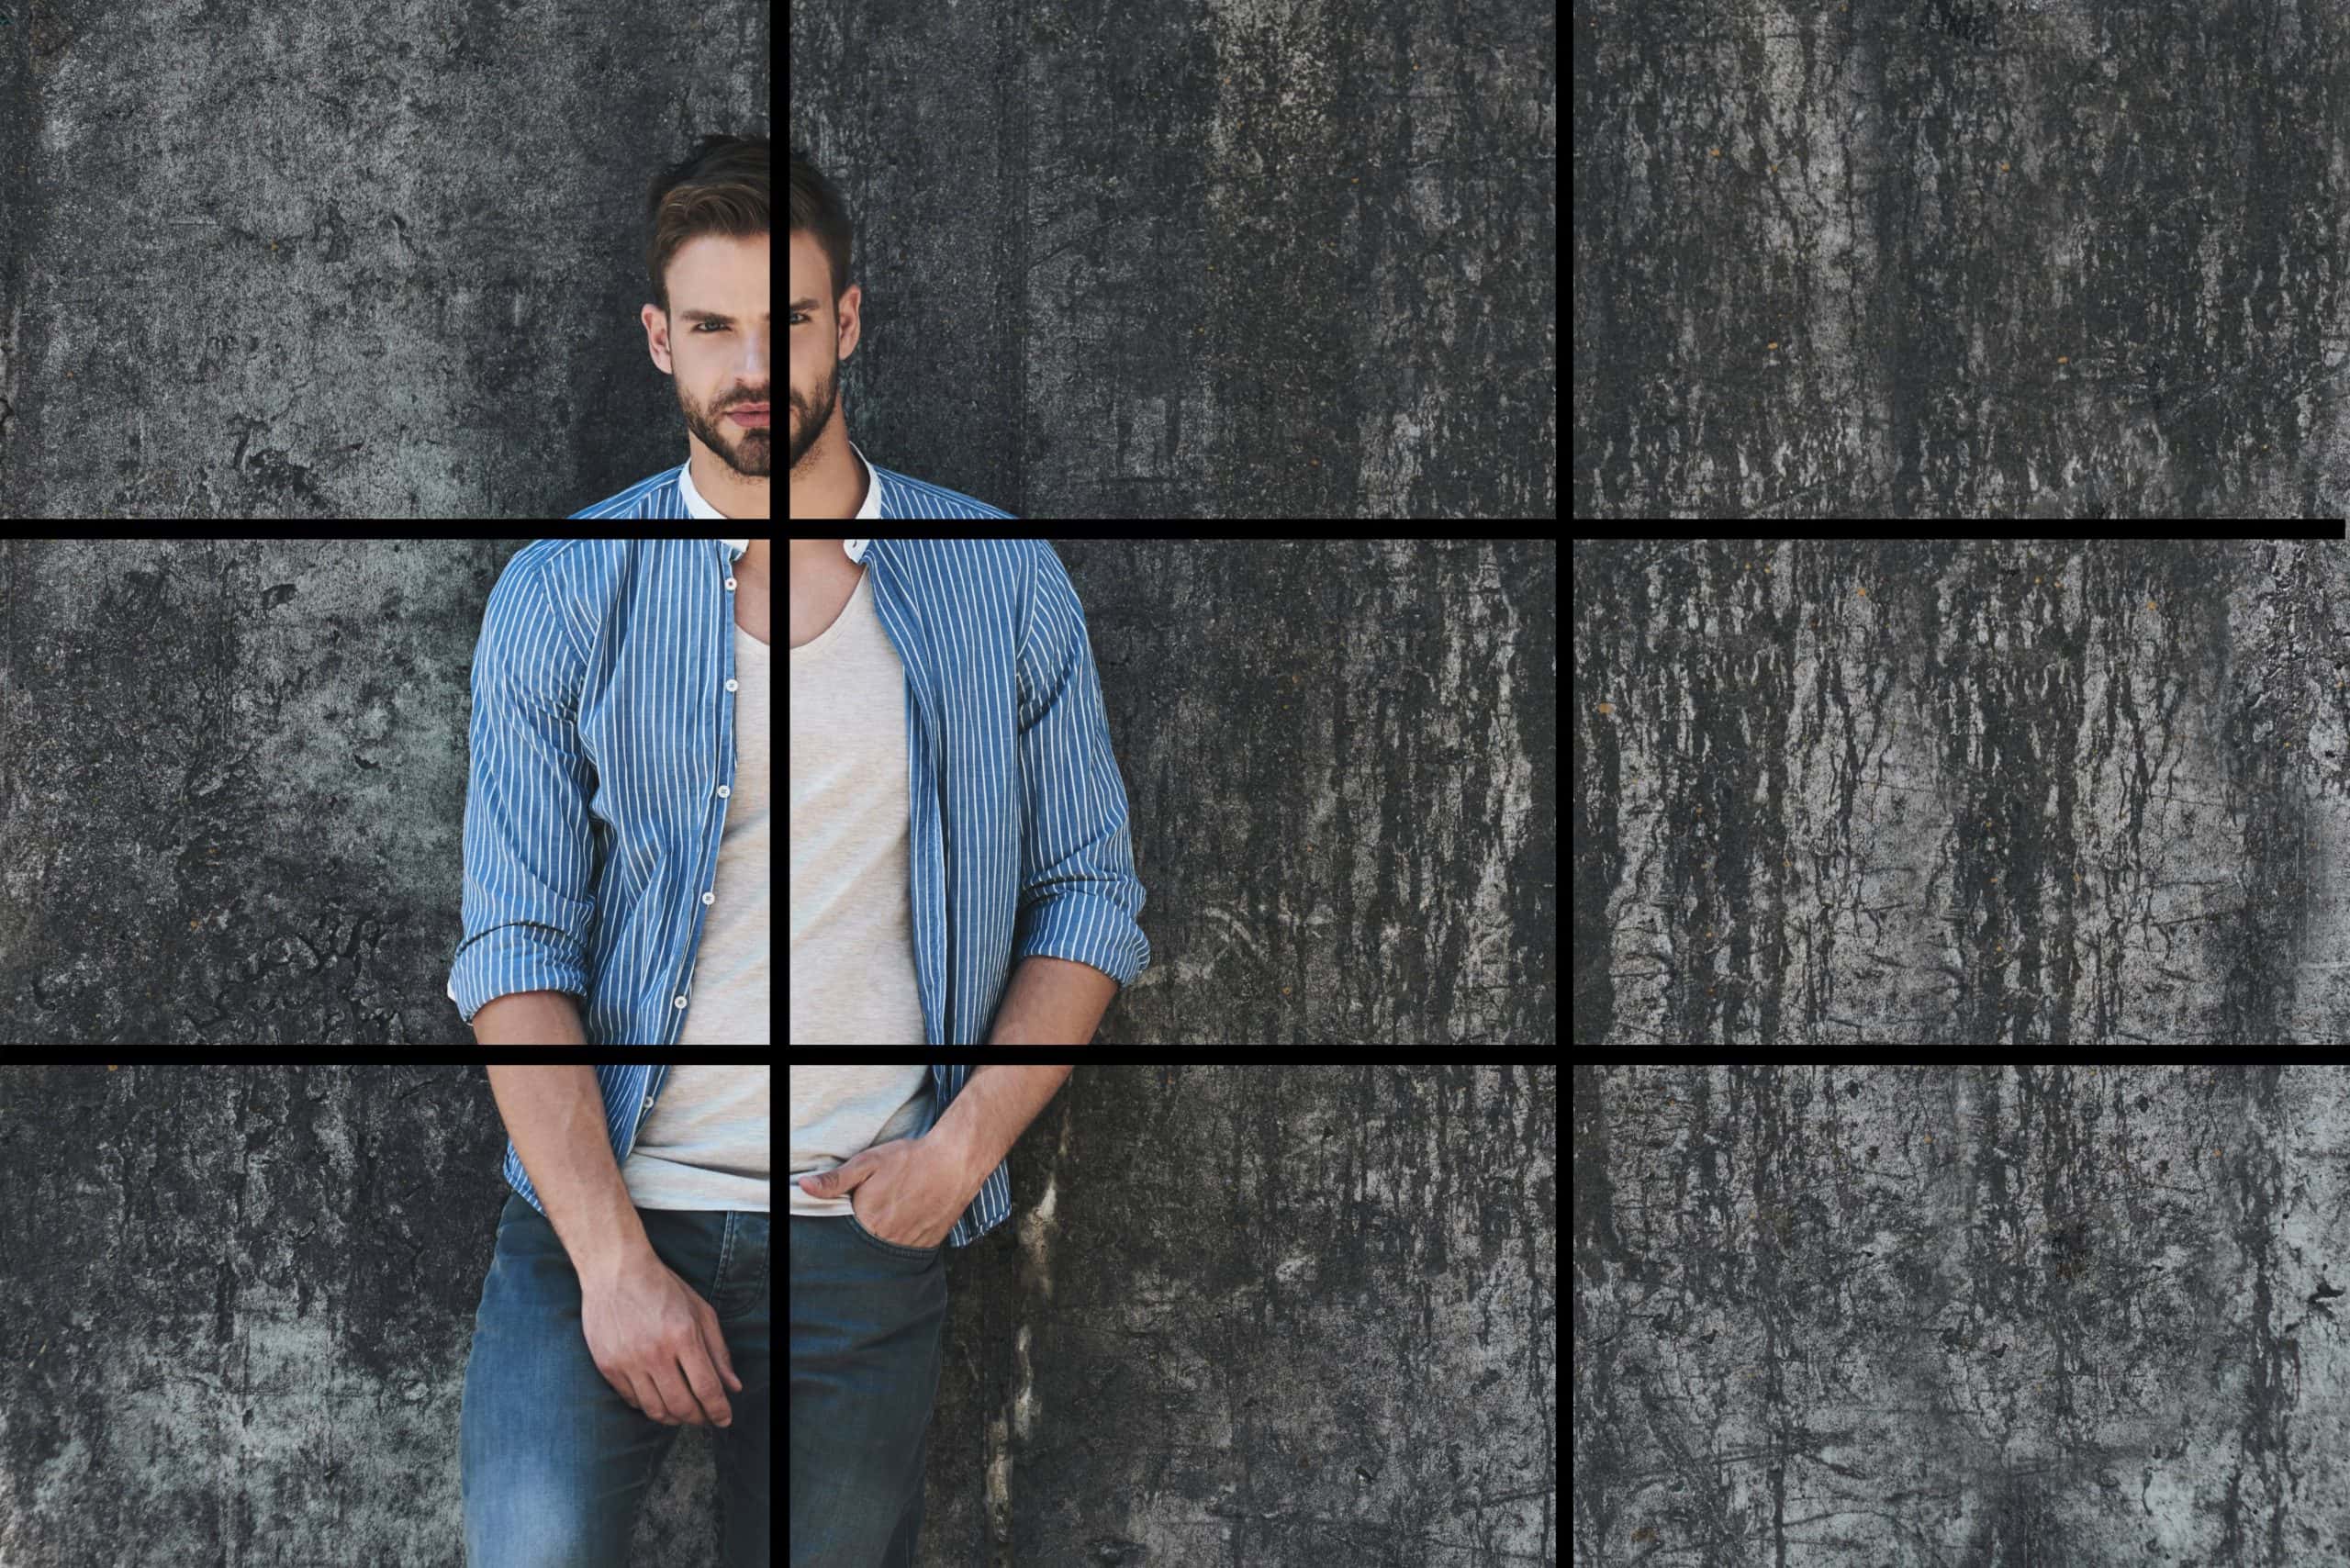 Tips for using the rule of thirds